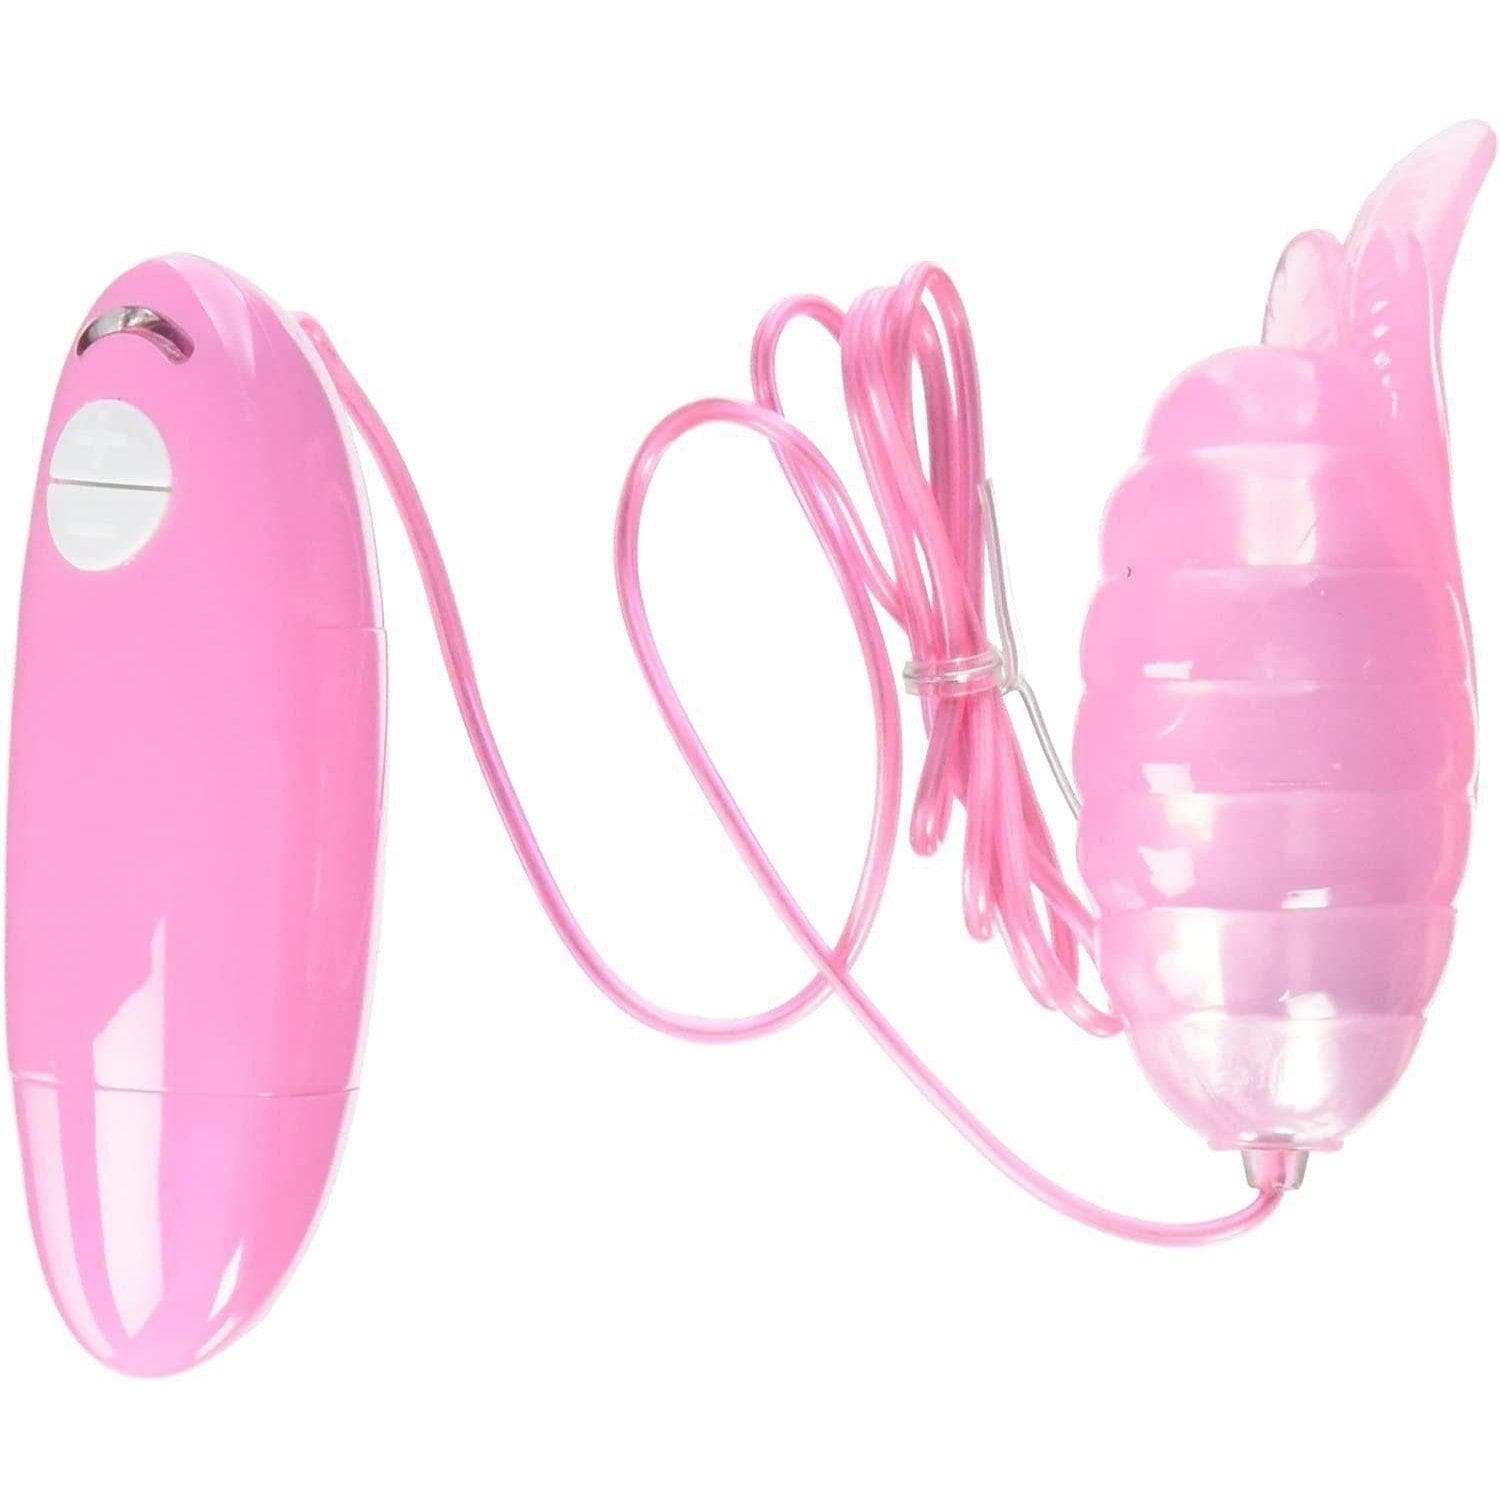 Passion Clit Tickler Remote Control 5 Speed Multi-Function Waterproof Vibrator - Romantic Blessings